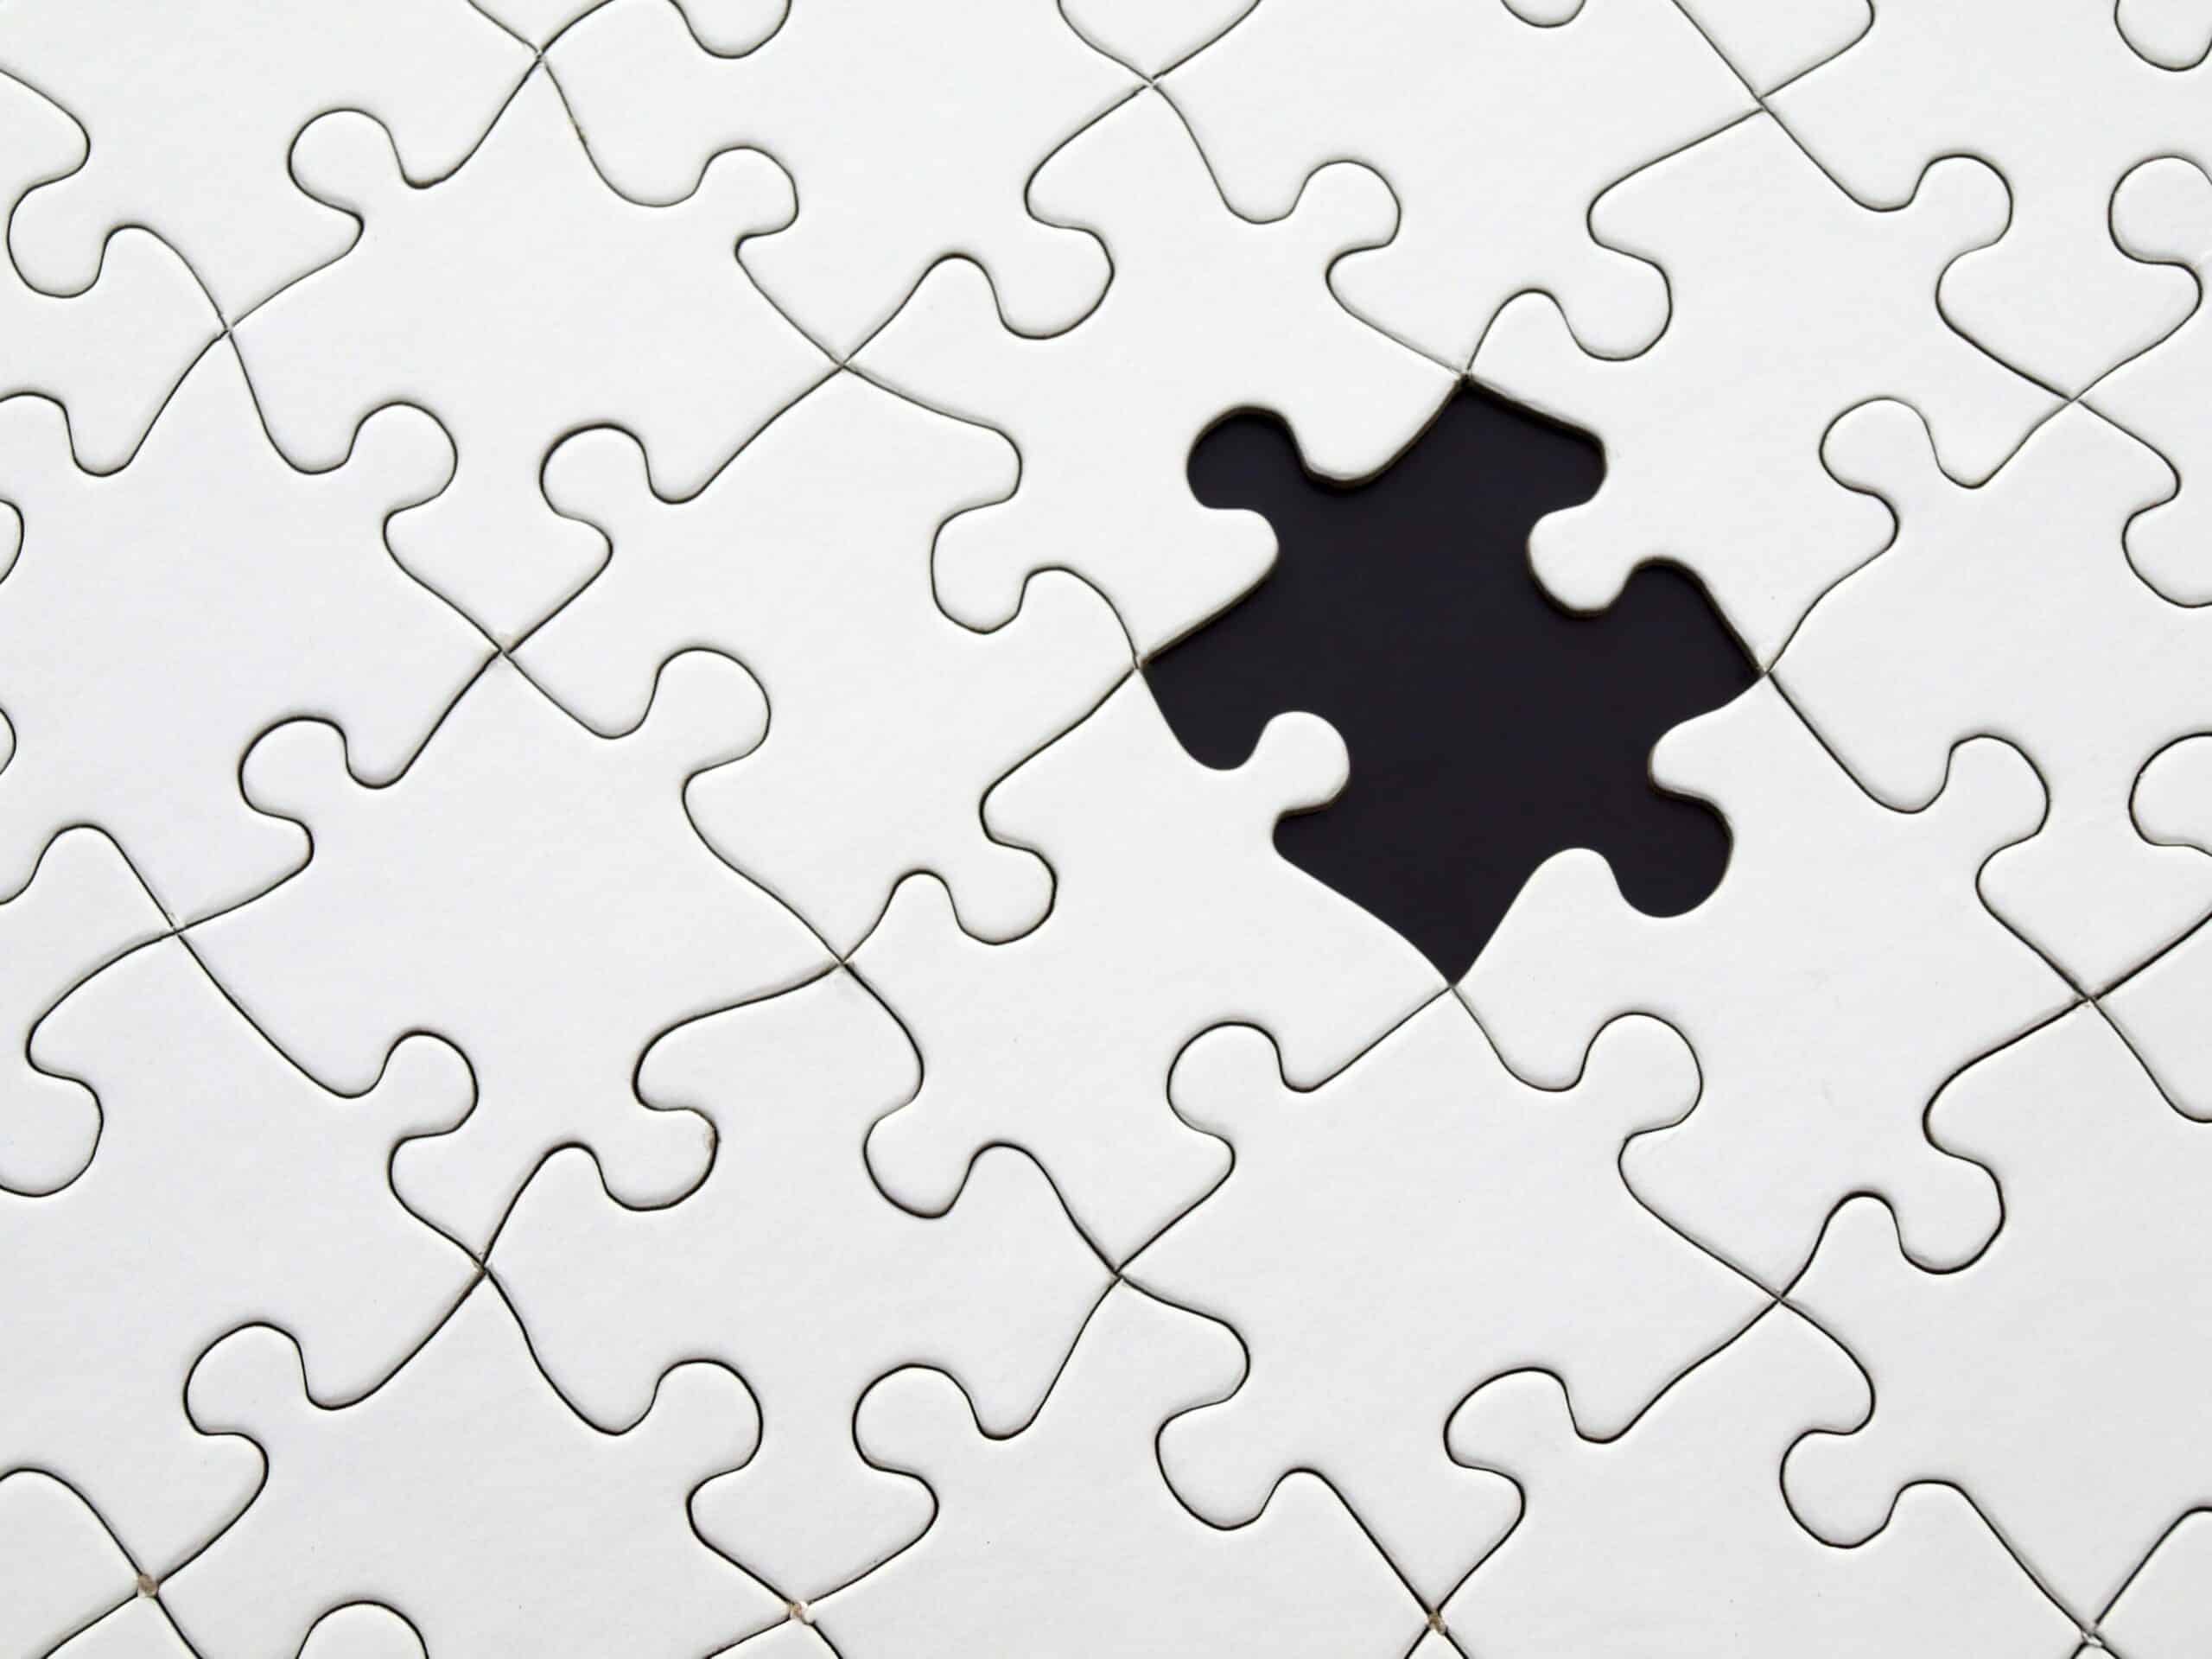 Jigsaw puzzle with one missing piece showing a black background behind.